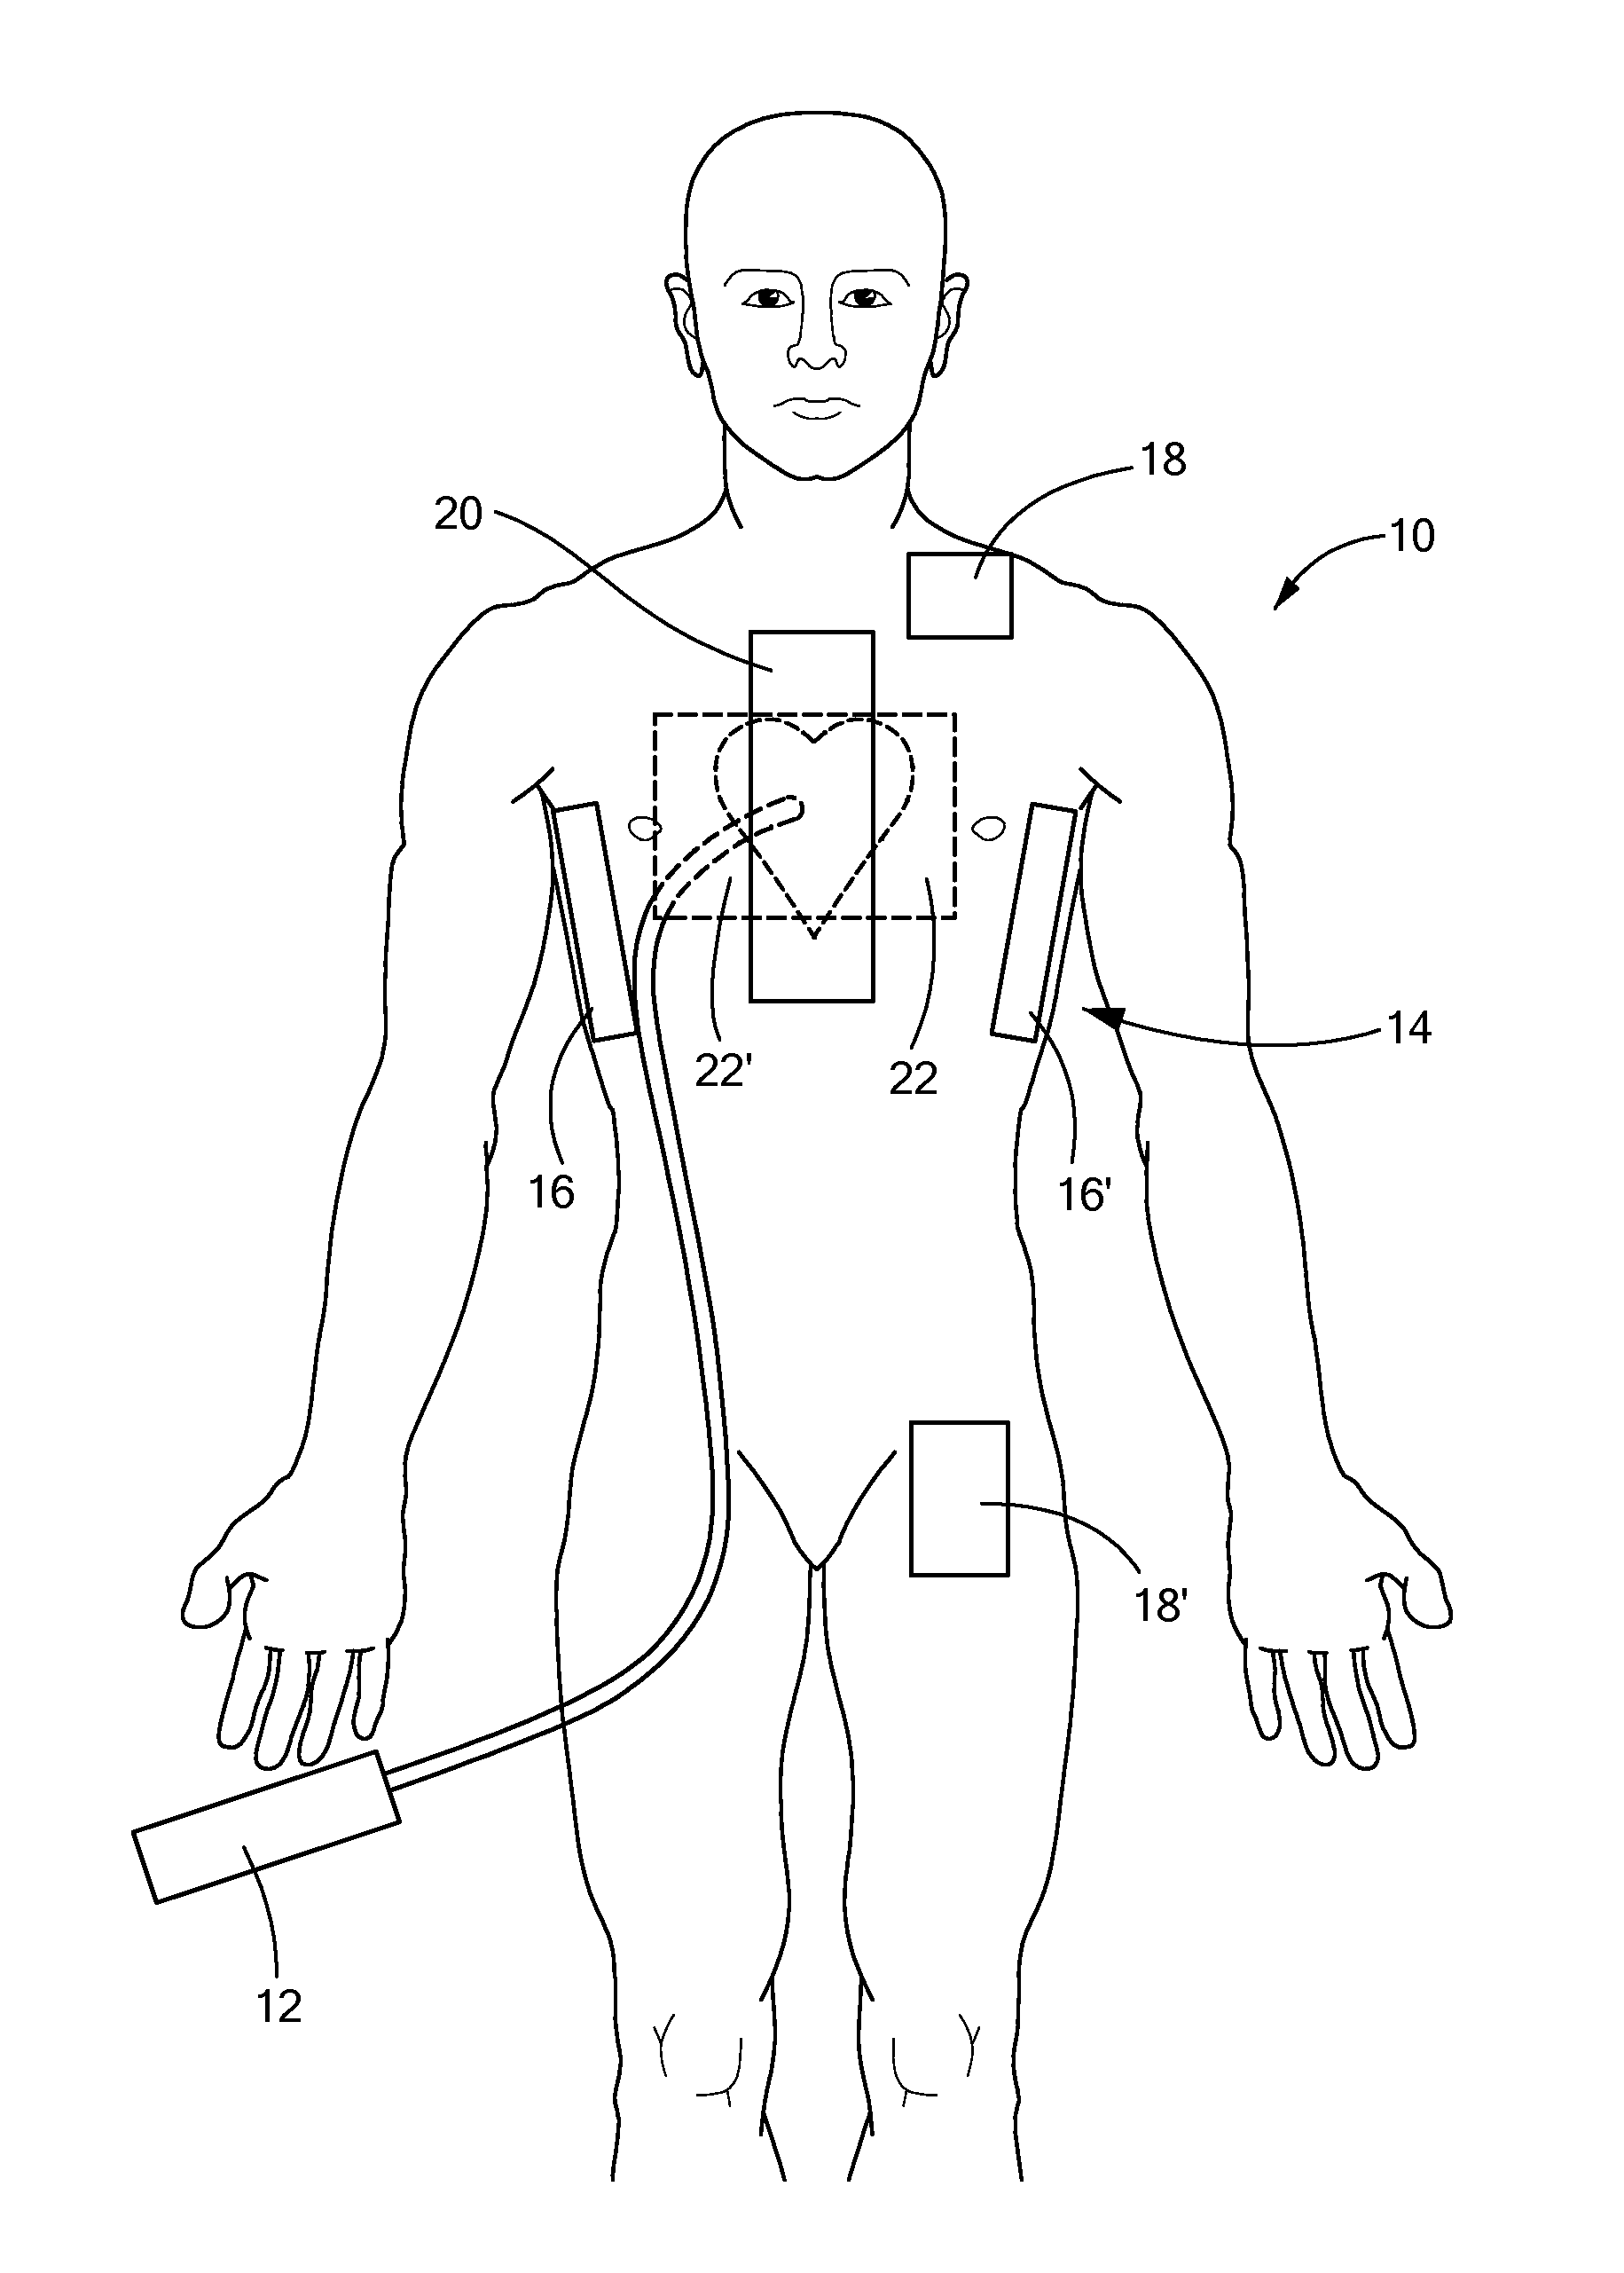 Systems and methods of performing medical procedures